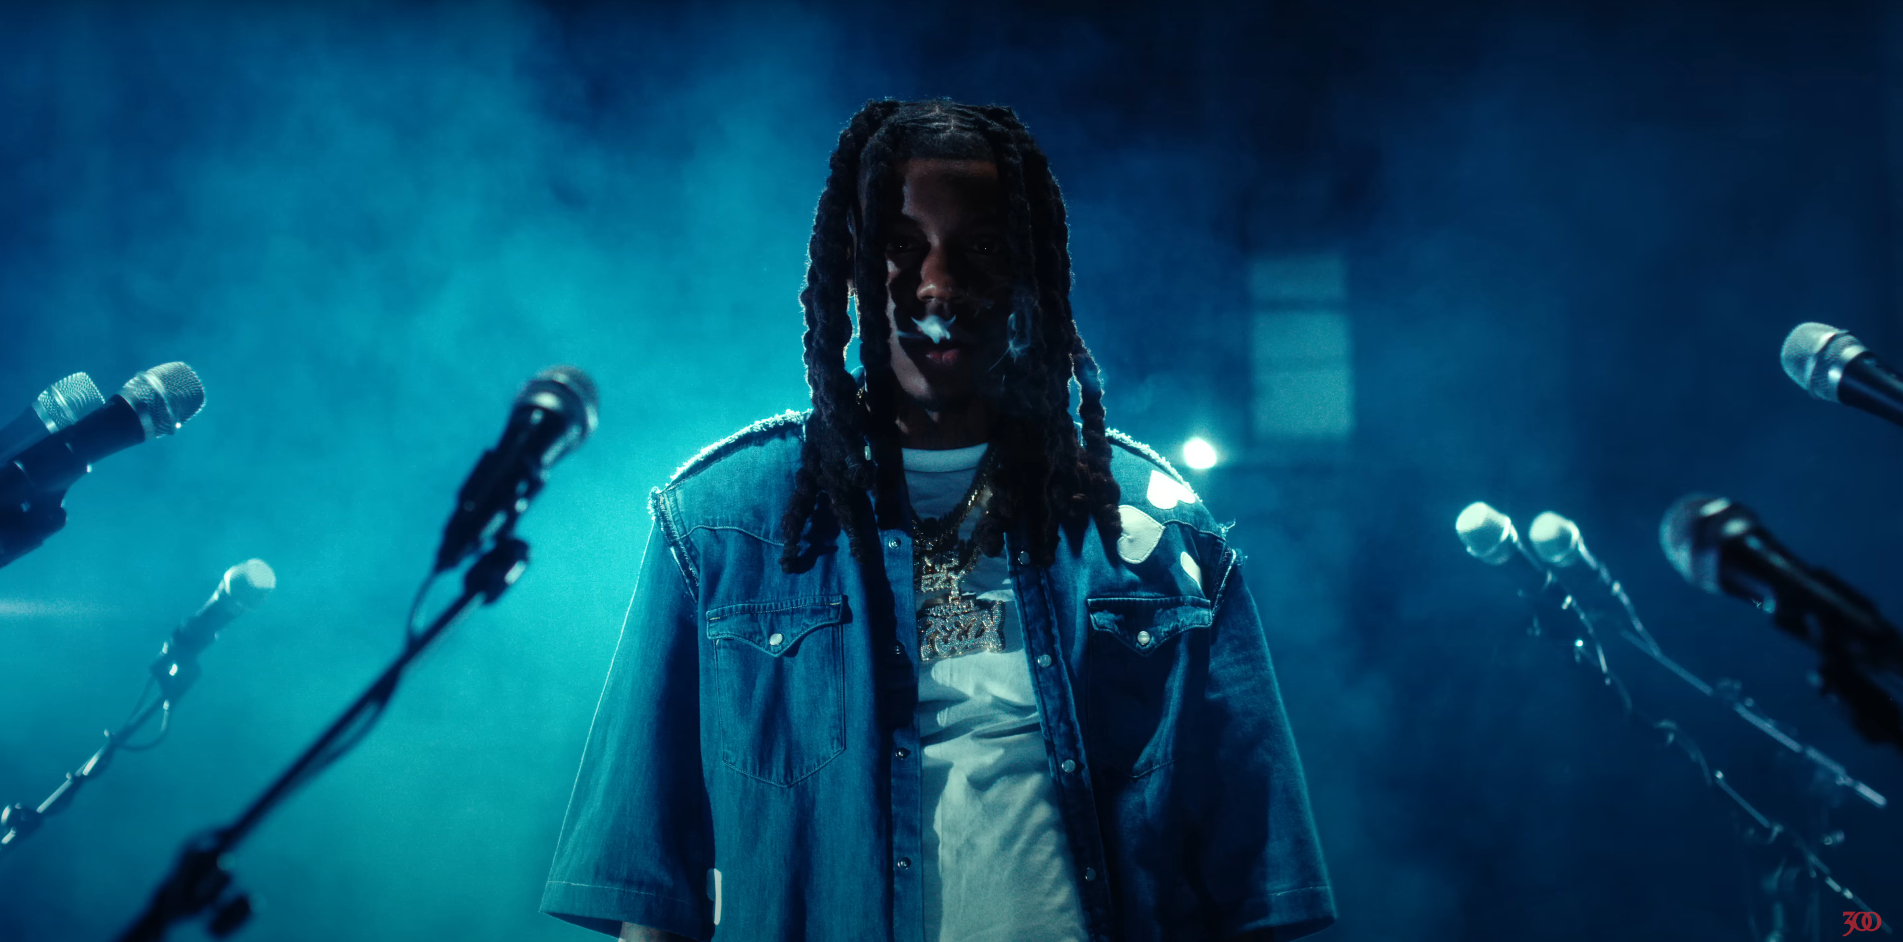 Load video: omb peezy wearing myke sims collection garments in music video